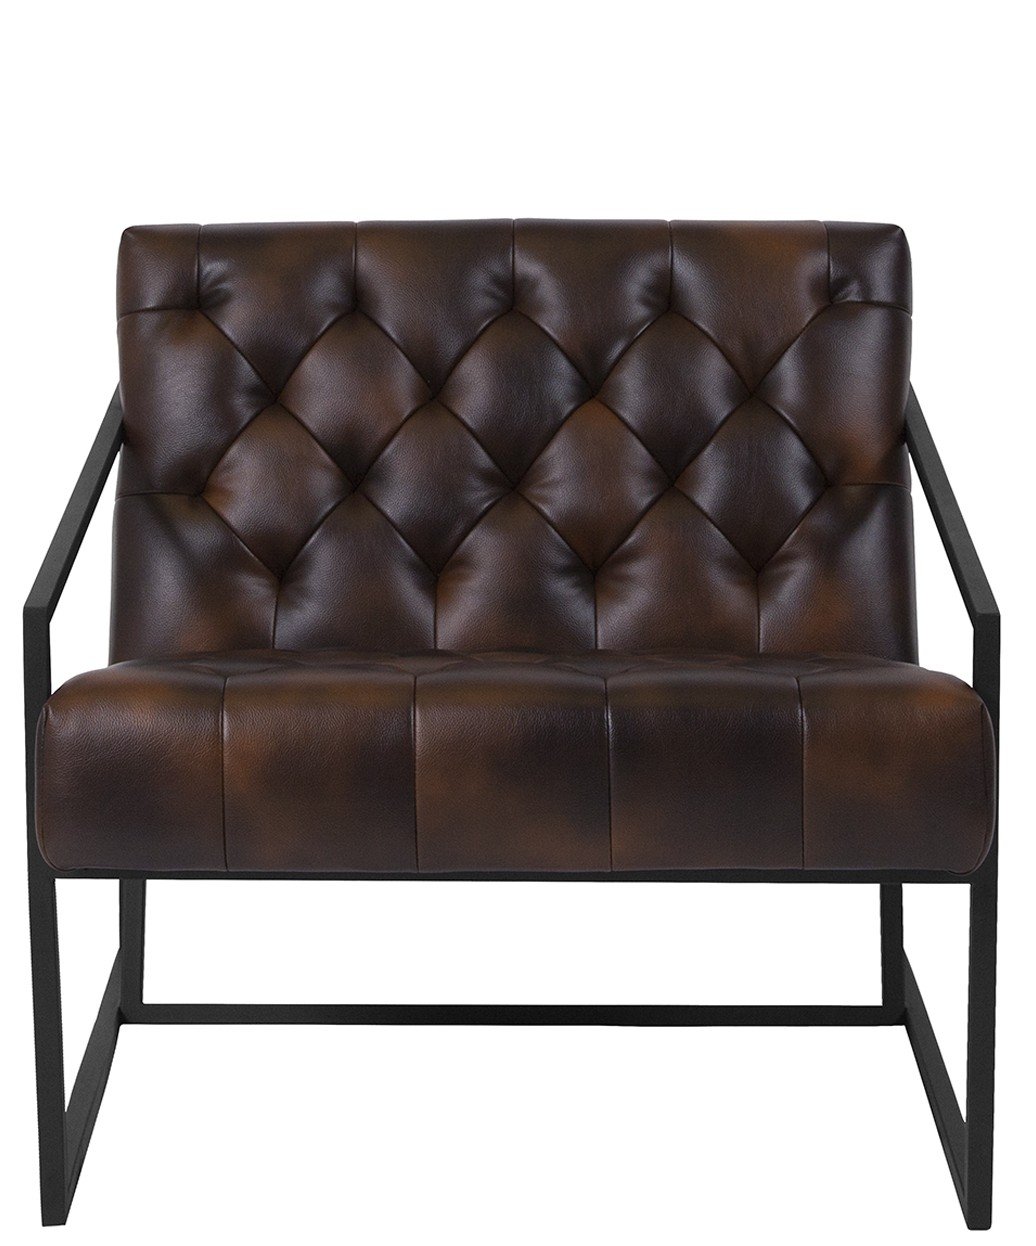 Keane Tufted Leather Chair w/ Metal Frame